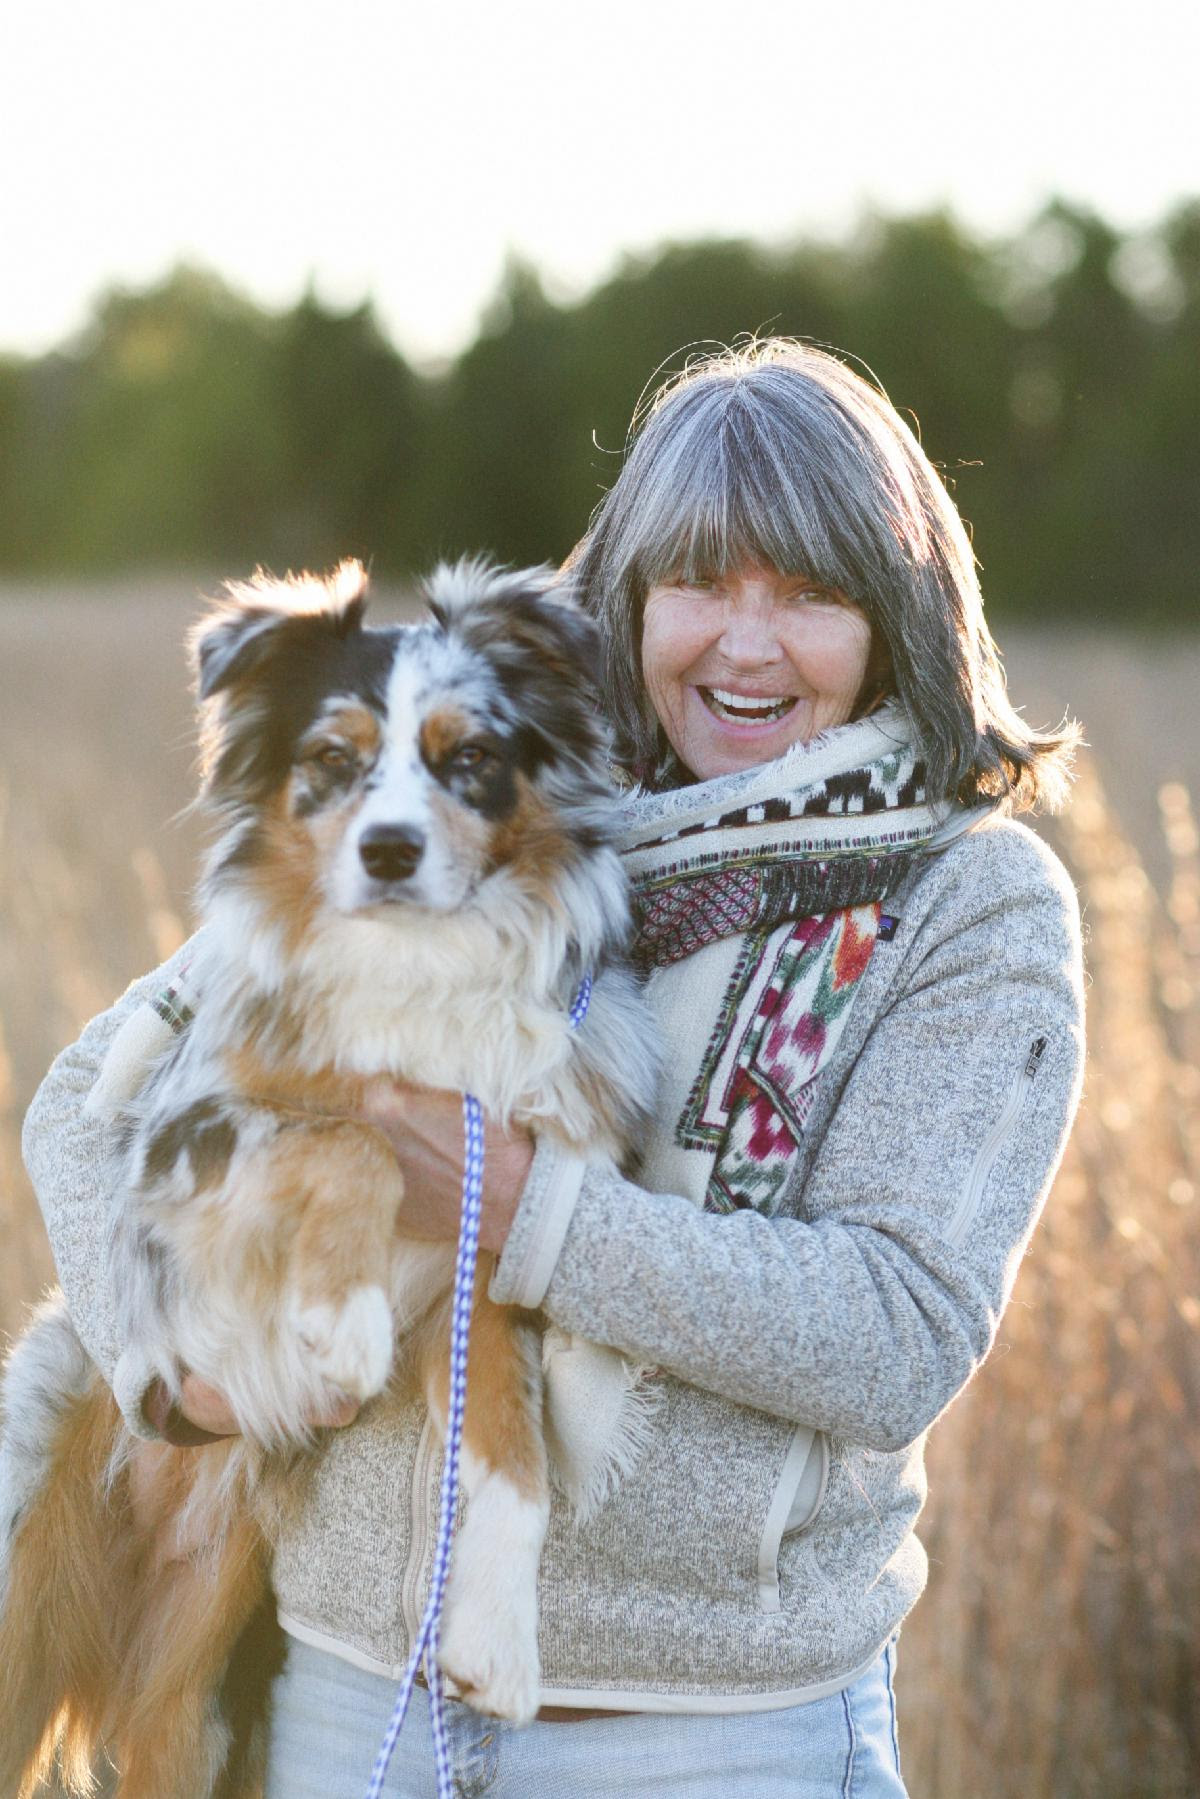 BioStar US founder and formulator Tigger Montague with her dog Wookie.